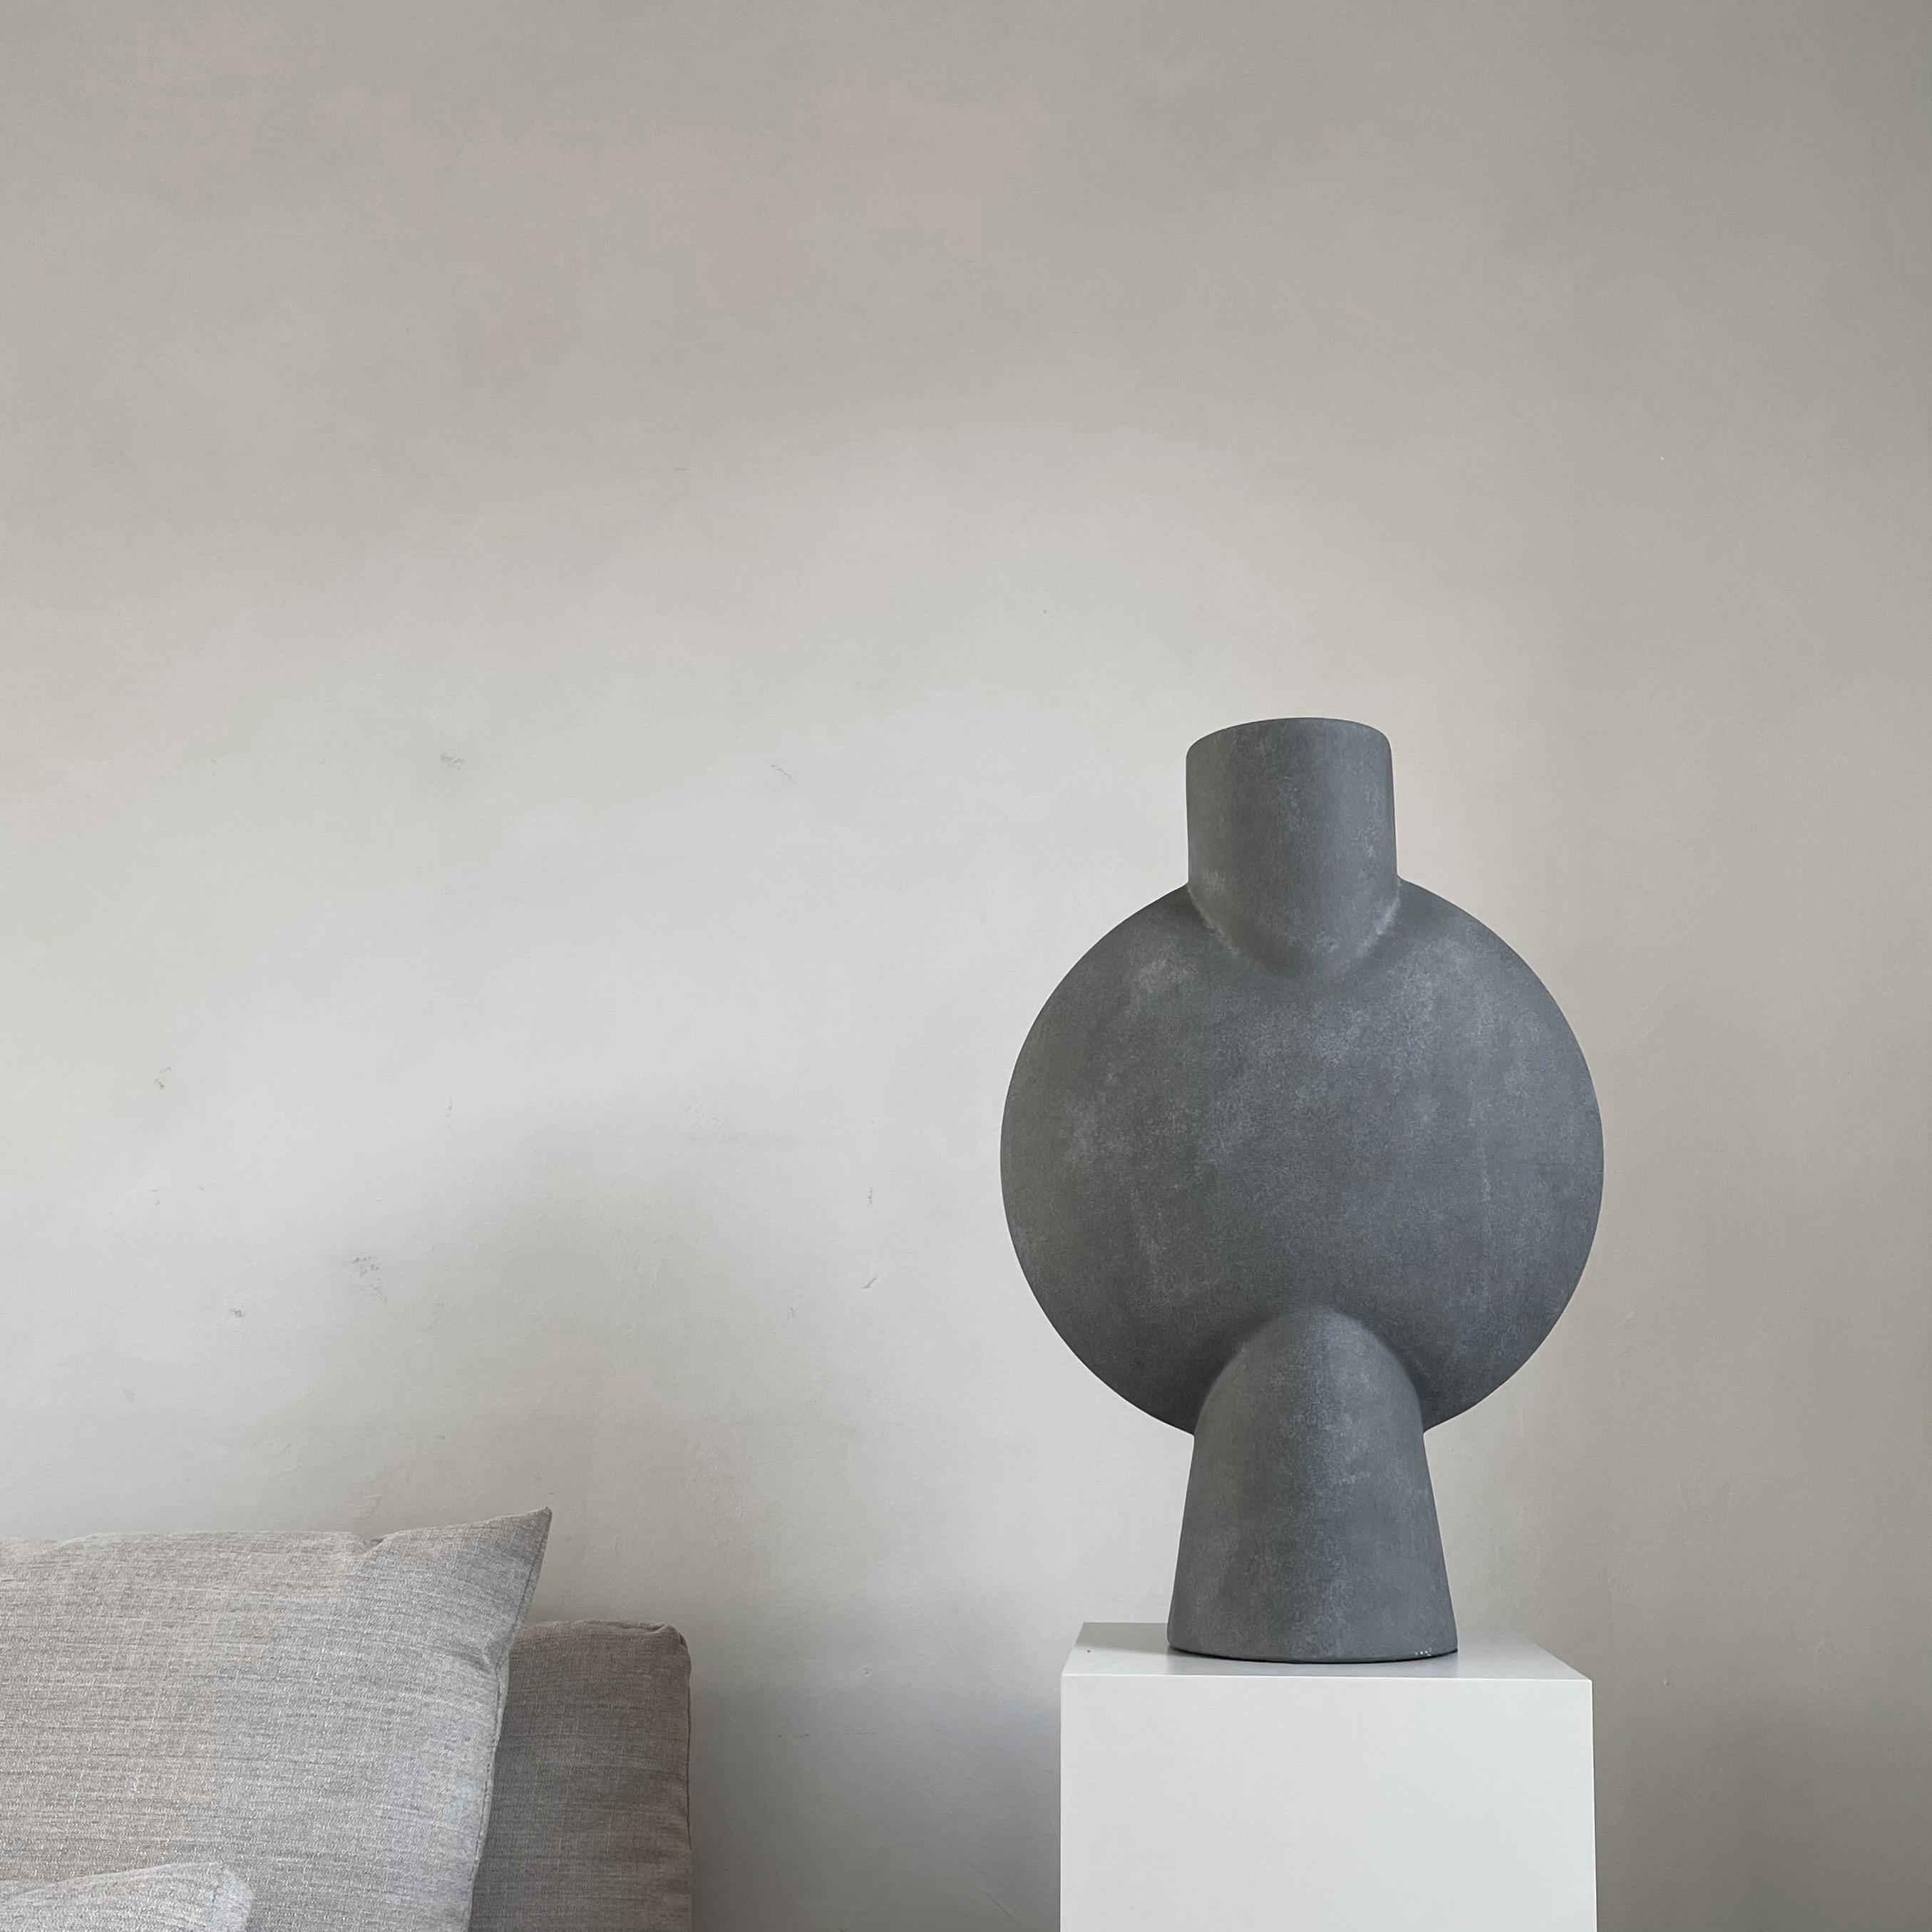 Dark grey sphere vase bubl hexa by 101 Copenhagen
Designed by Kristian Sofus Hansen & Tommy Hyldahl
Dimensions: L 42 / W 18,5 / H 60 cm
Materials: Ceramic

The Sphere collection celebrates unique silhouettes and textures that makes an impact